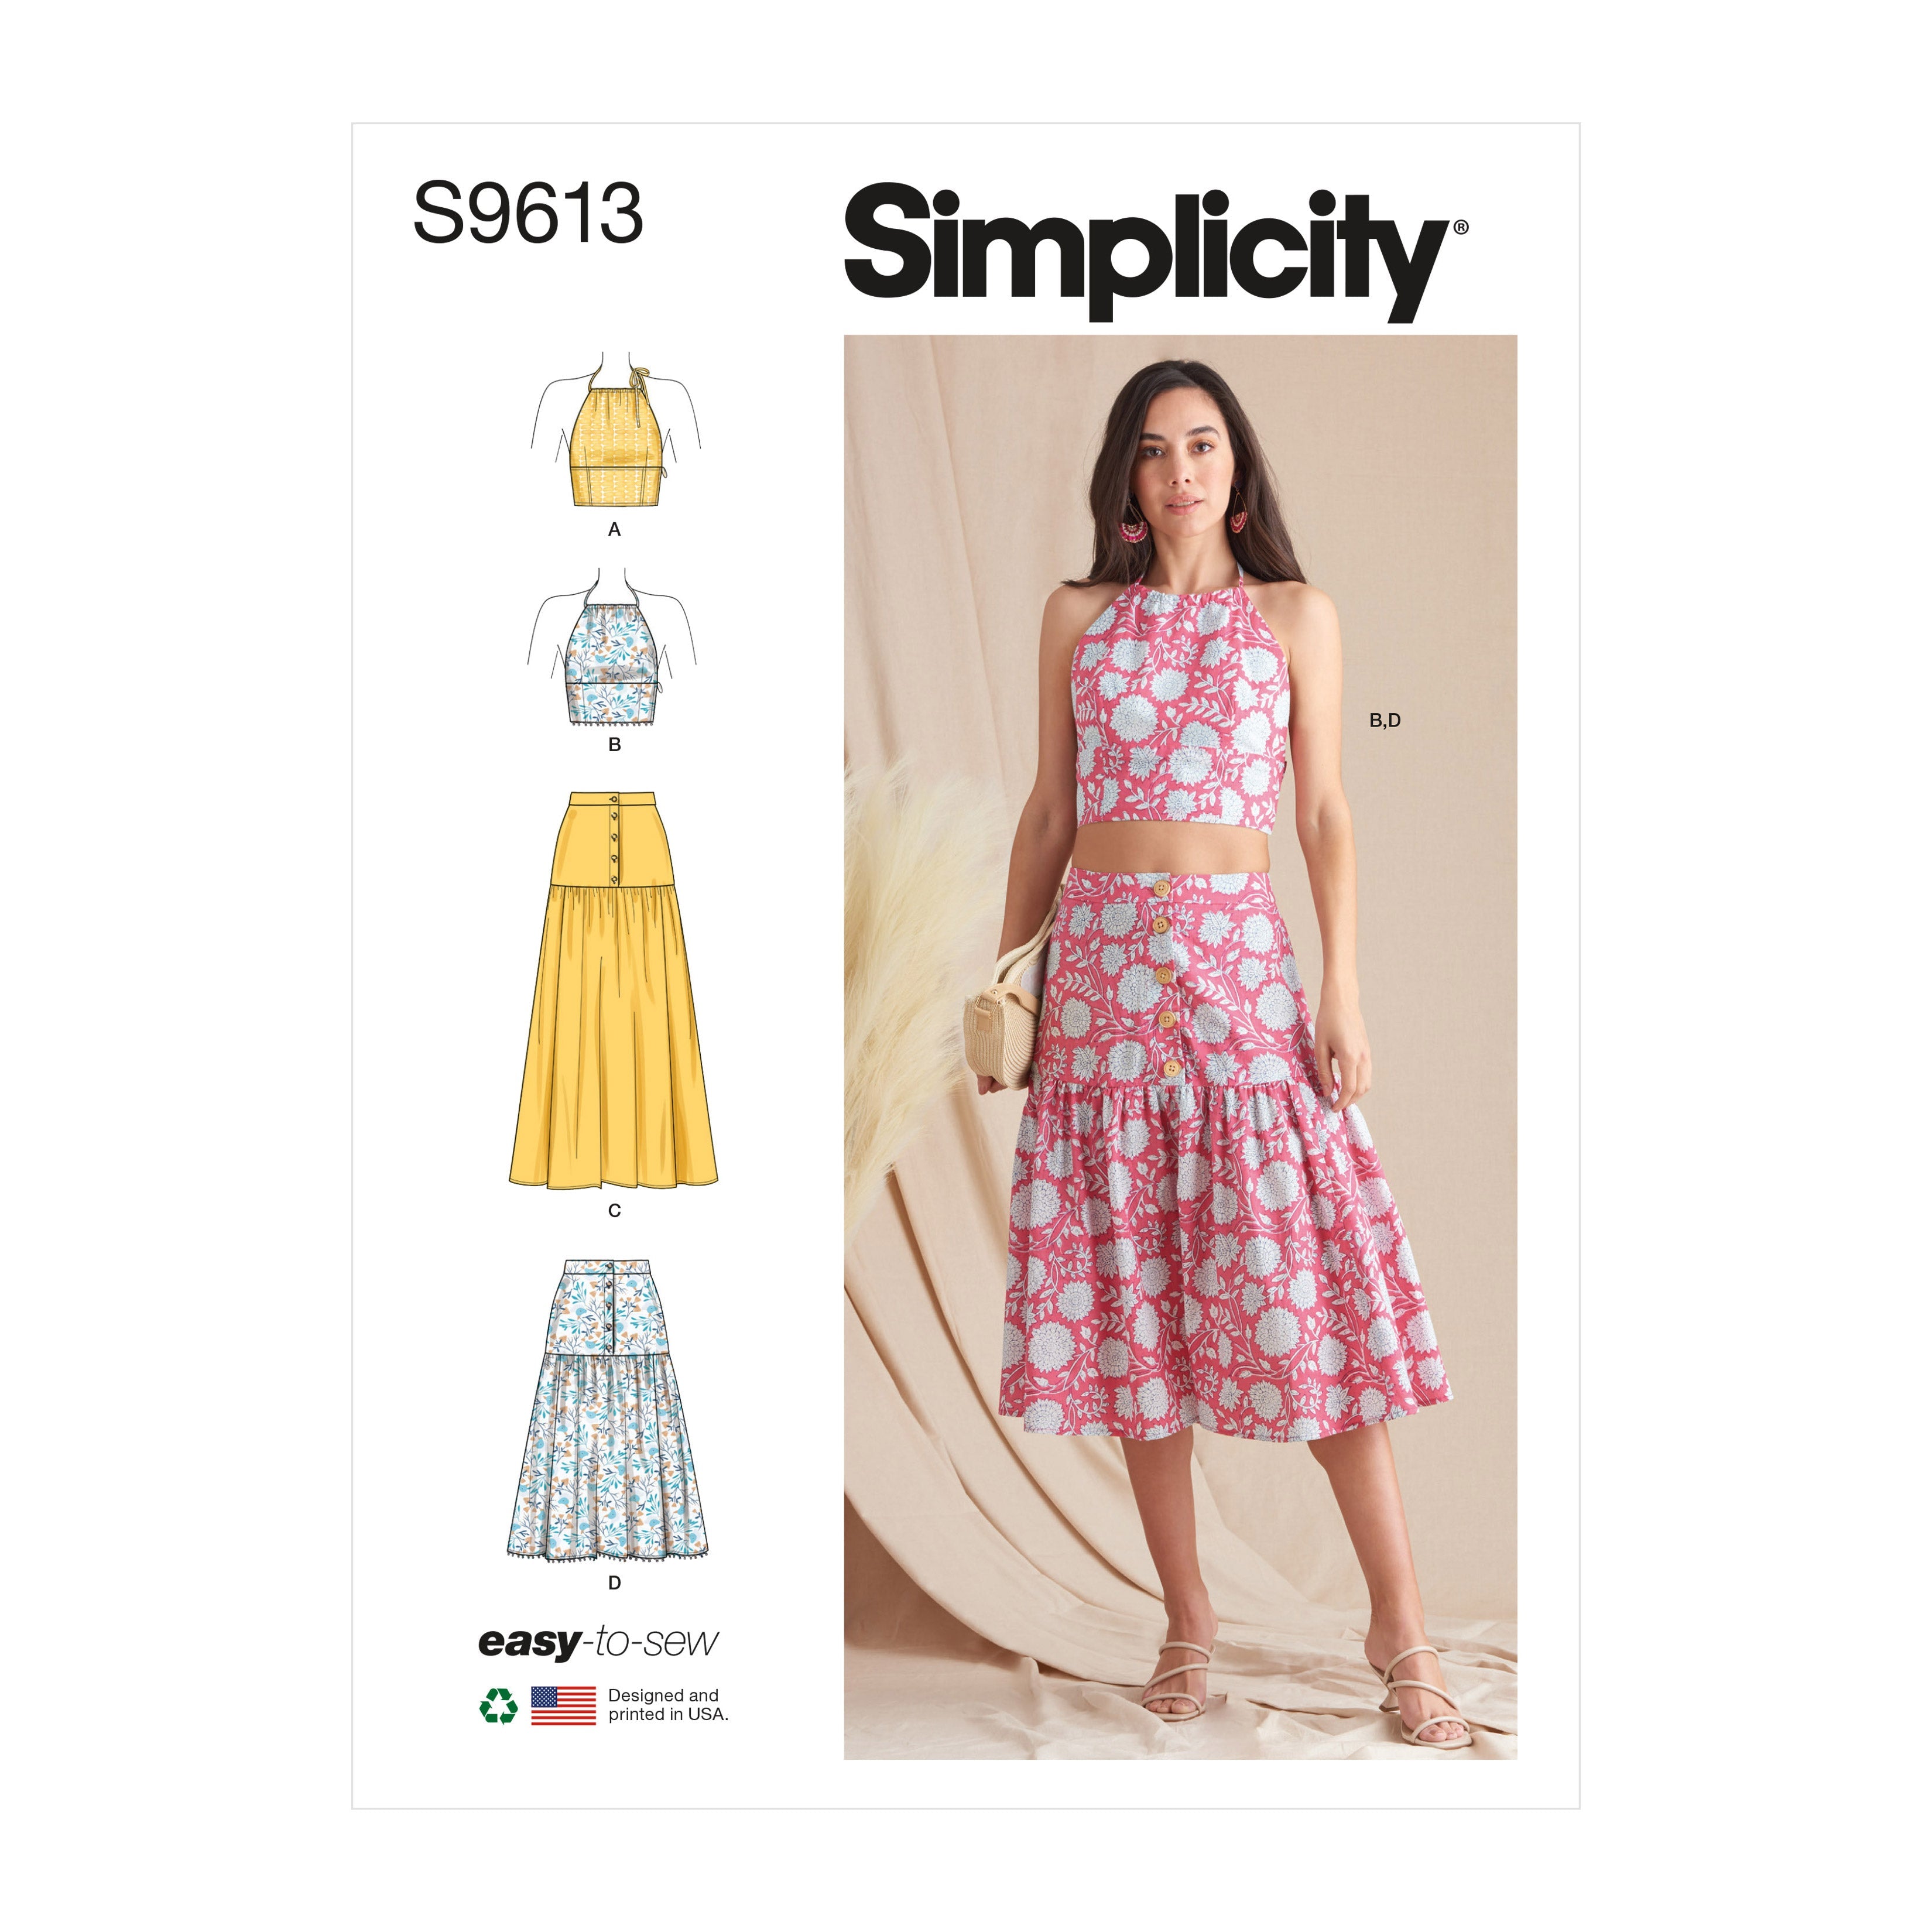 Simplicity Sewing Pattern 9613 Misses' Top and Skirts from Jaycotts Sewing Supplies